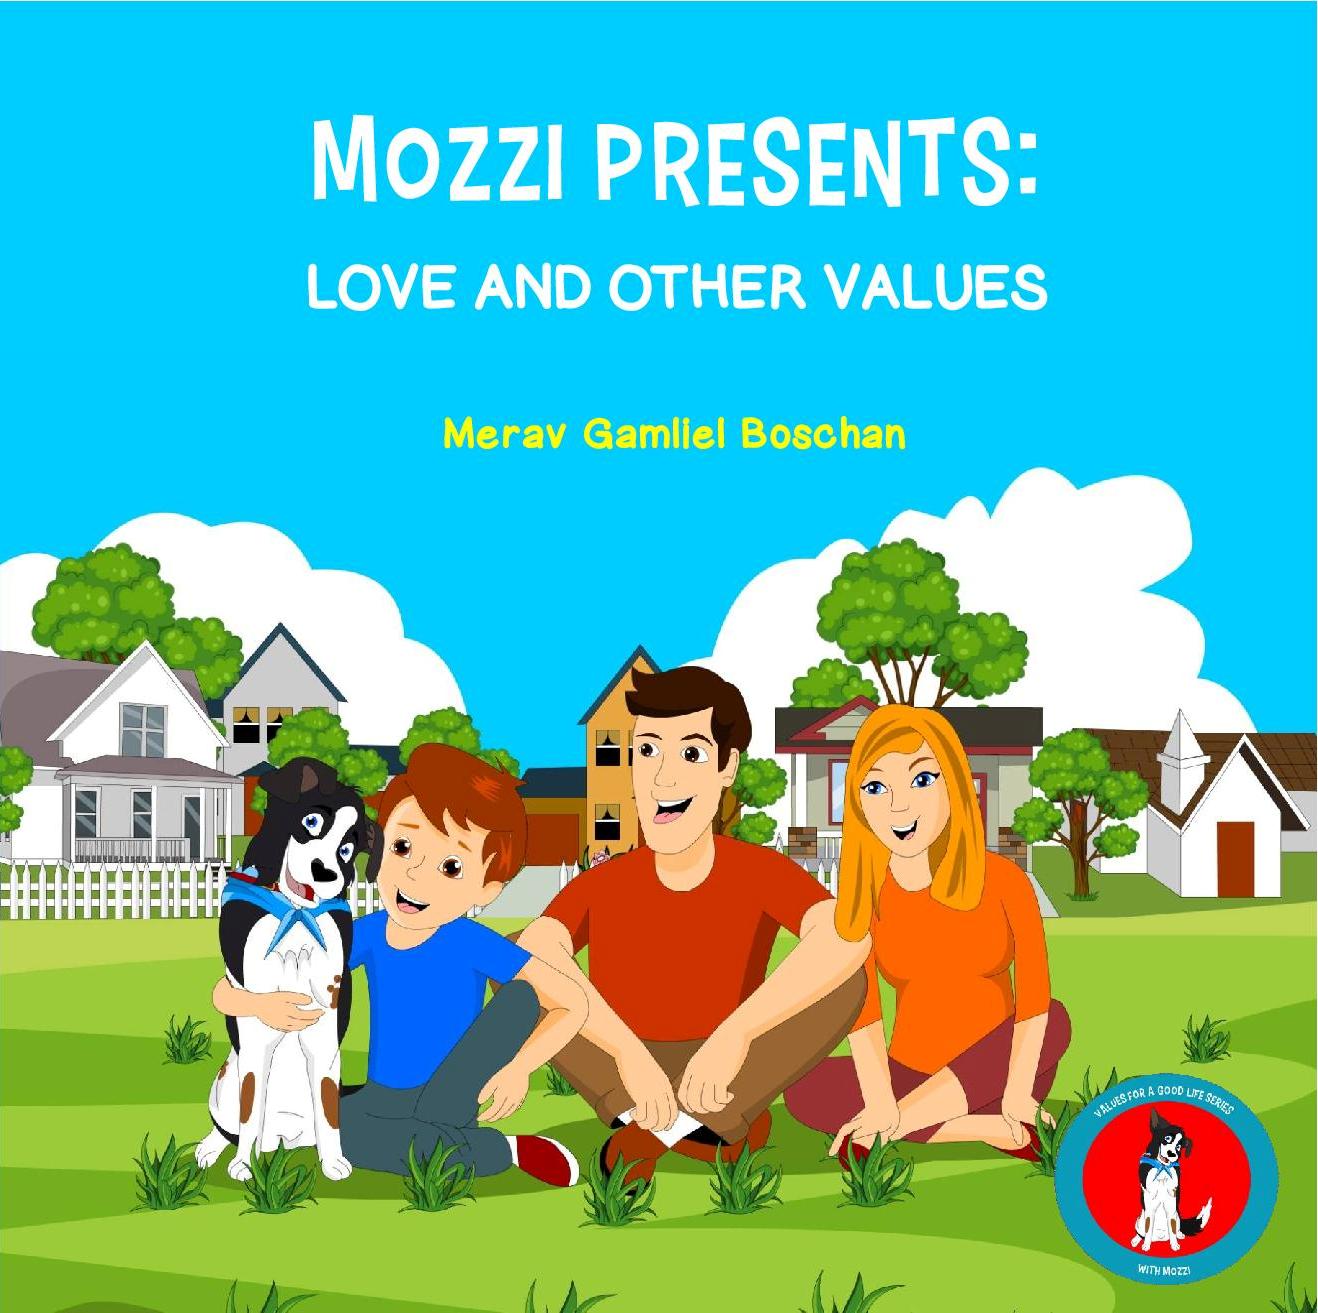 FREE: MOZZI PRESENTS: LOVE AND OTHER VALUES by MERAV GAMLIEL BOSCHAN